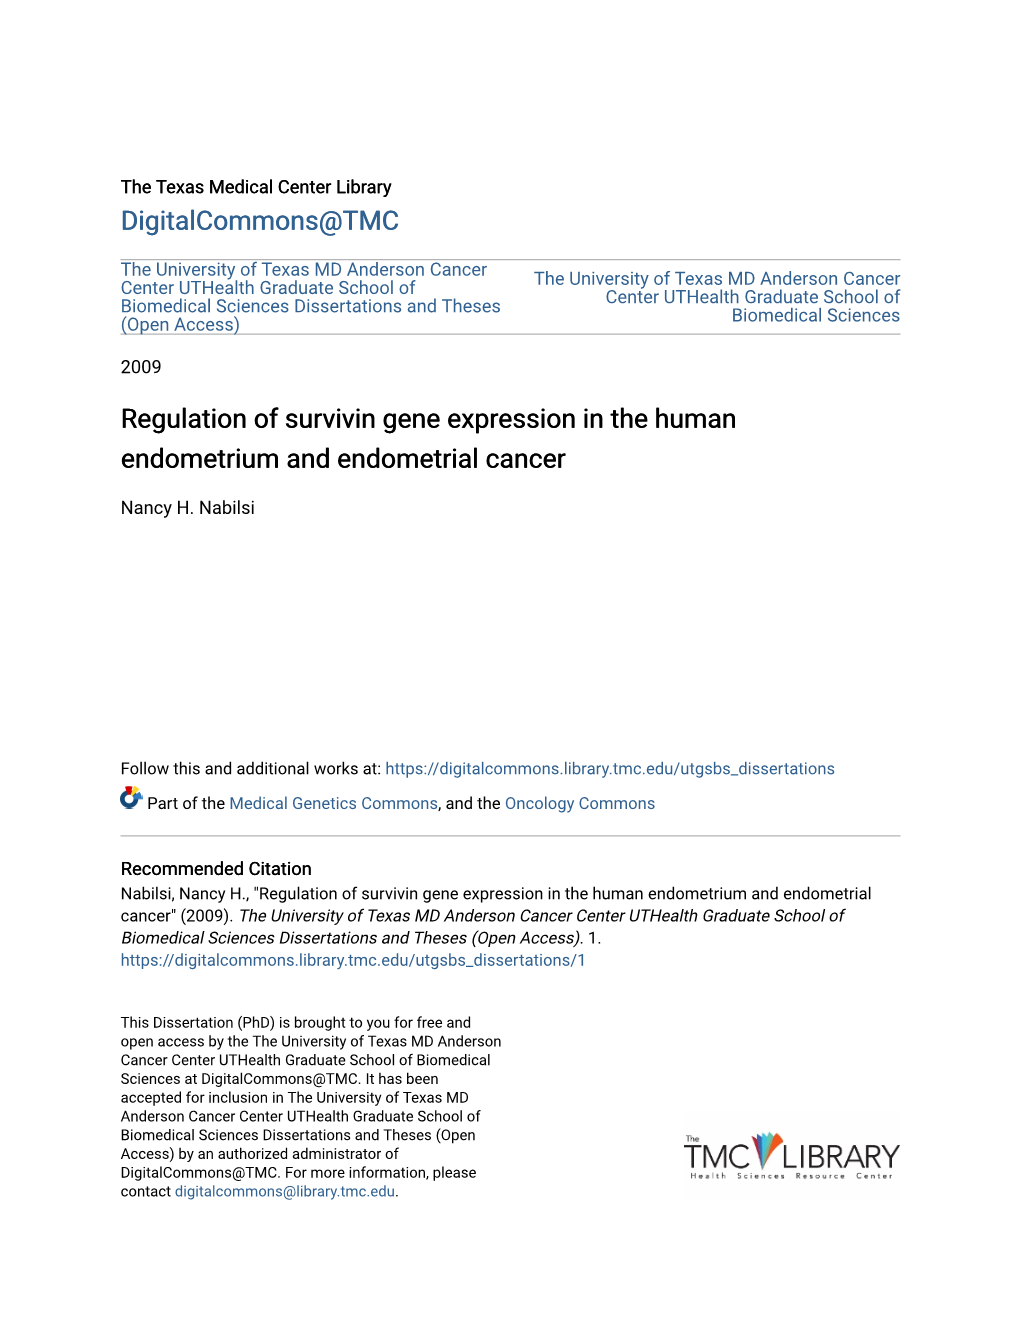 Regulation of Survivin Gene Expression in the Human Endometrium and Endometrial Cancer